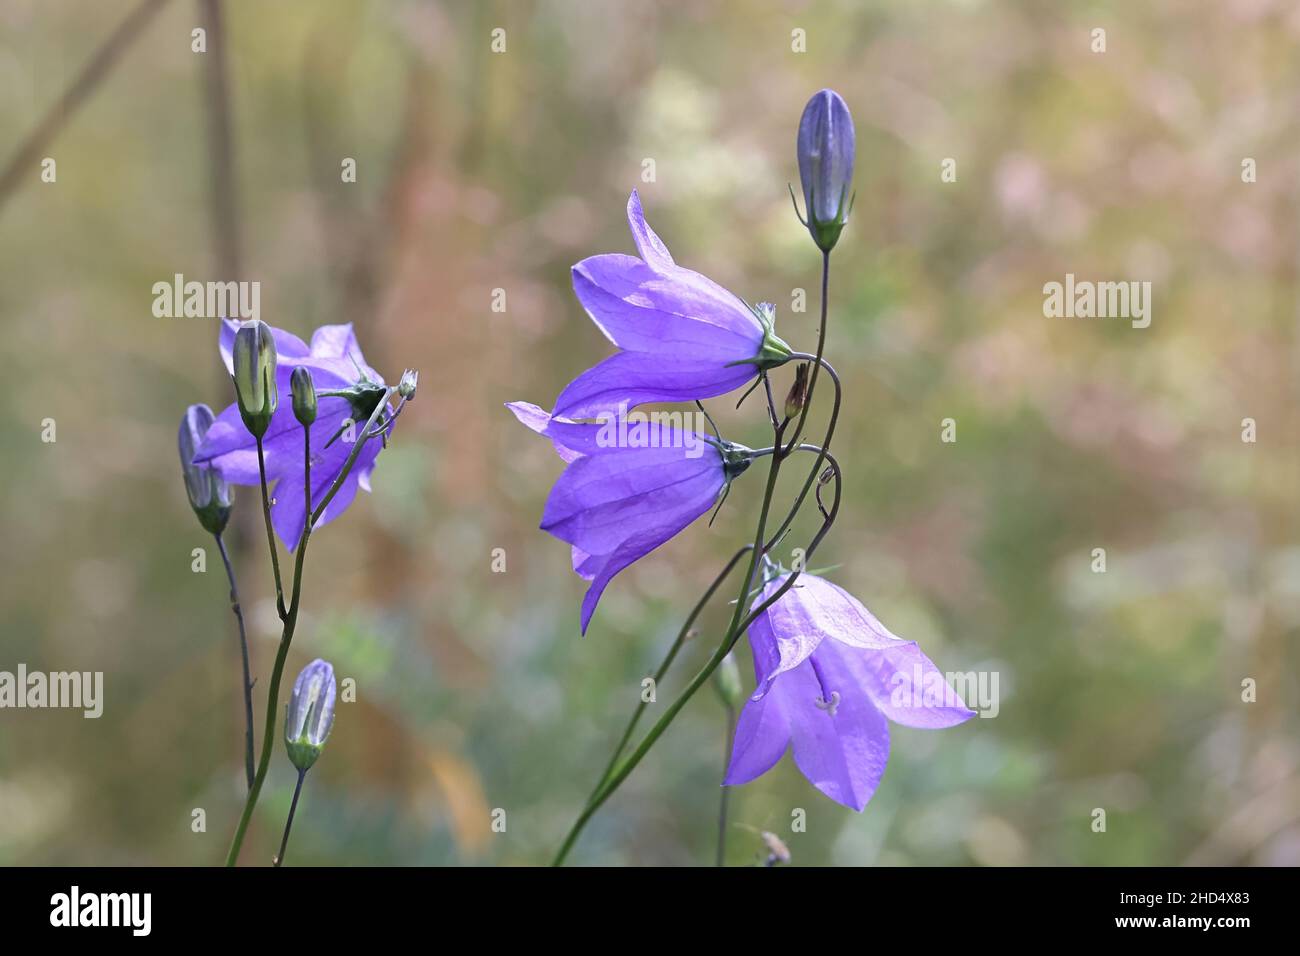 Campanula rotundifolia, commonly known as Harebell, Bluebell or Bluebell bellflower, wild flower from Finland Stock Photo